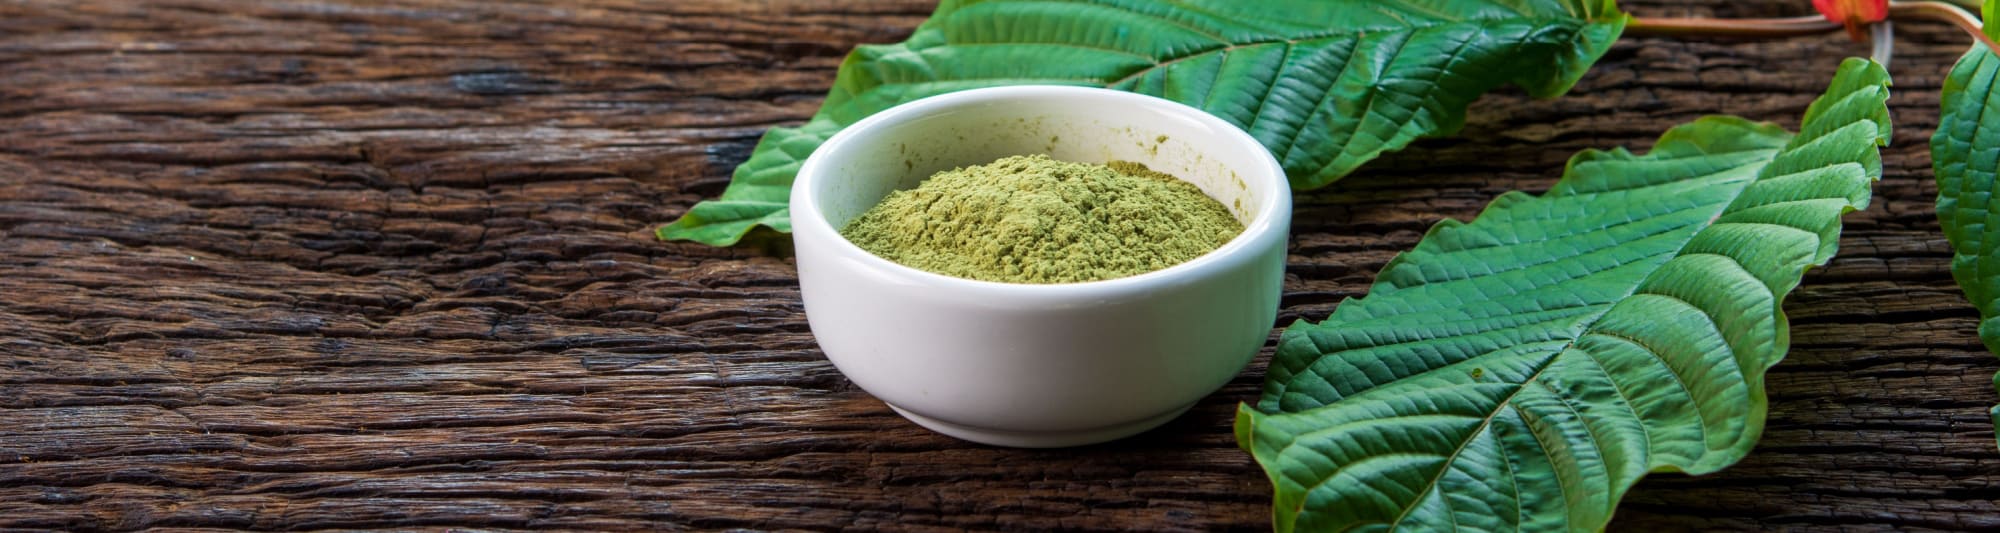 image of online vendors for kratom products